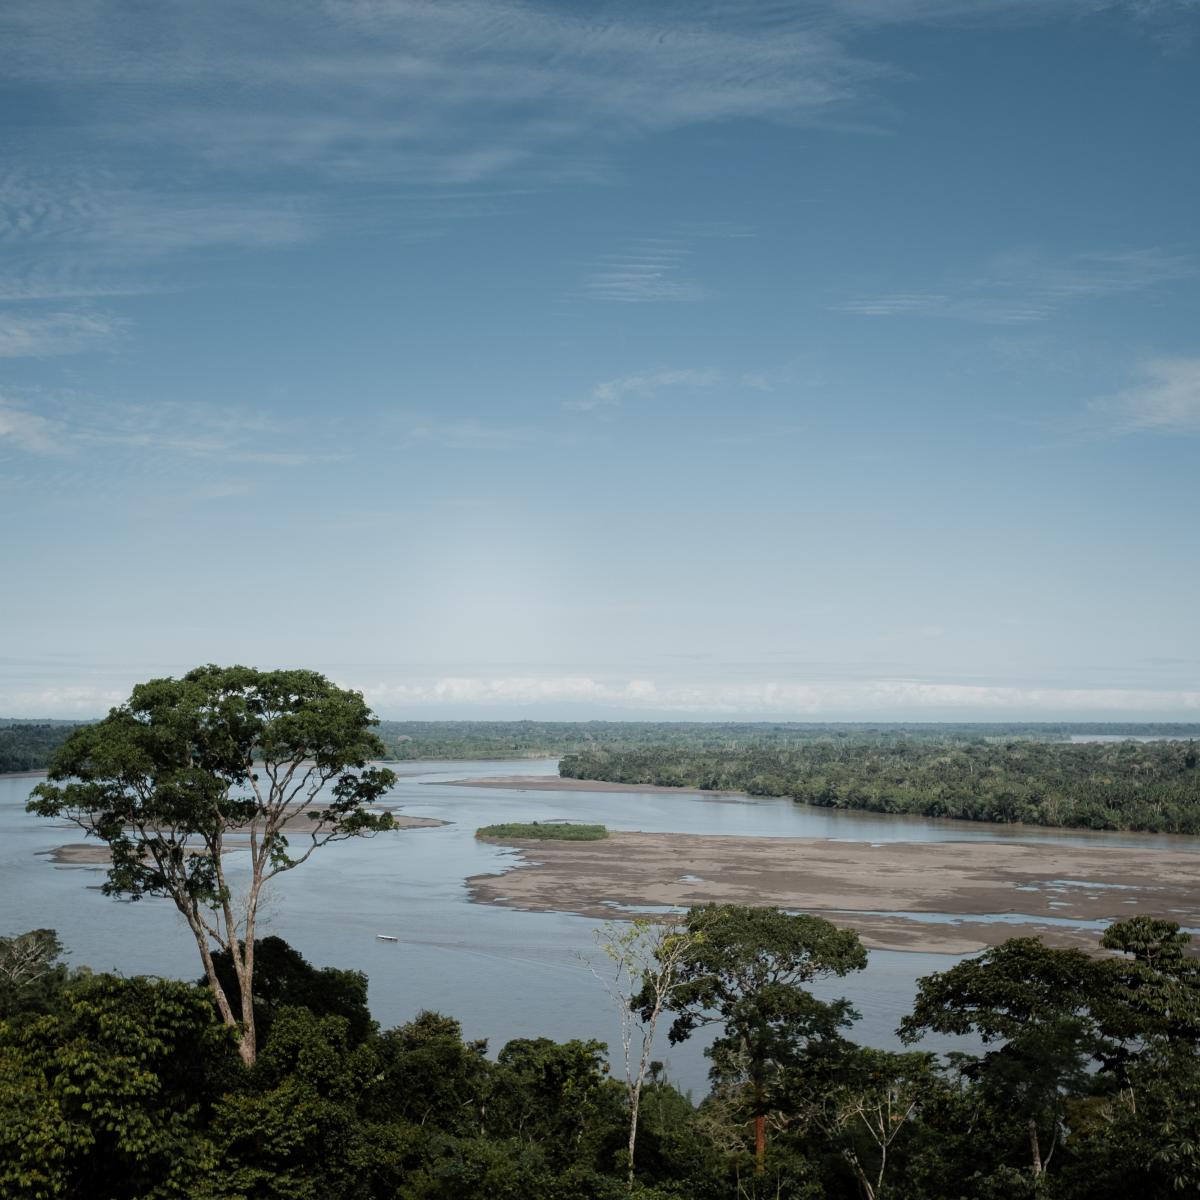 This picture shows a river and landscape of the Amazon River. This is part of the Yasuní National Park in Ecuador. 